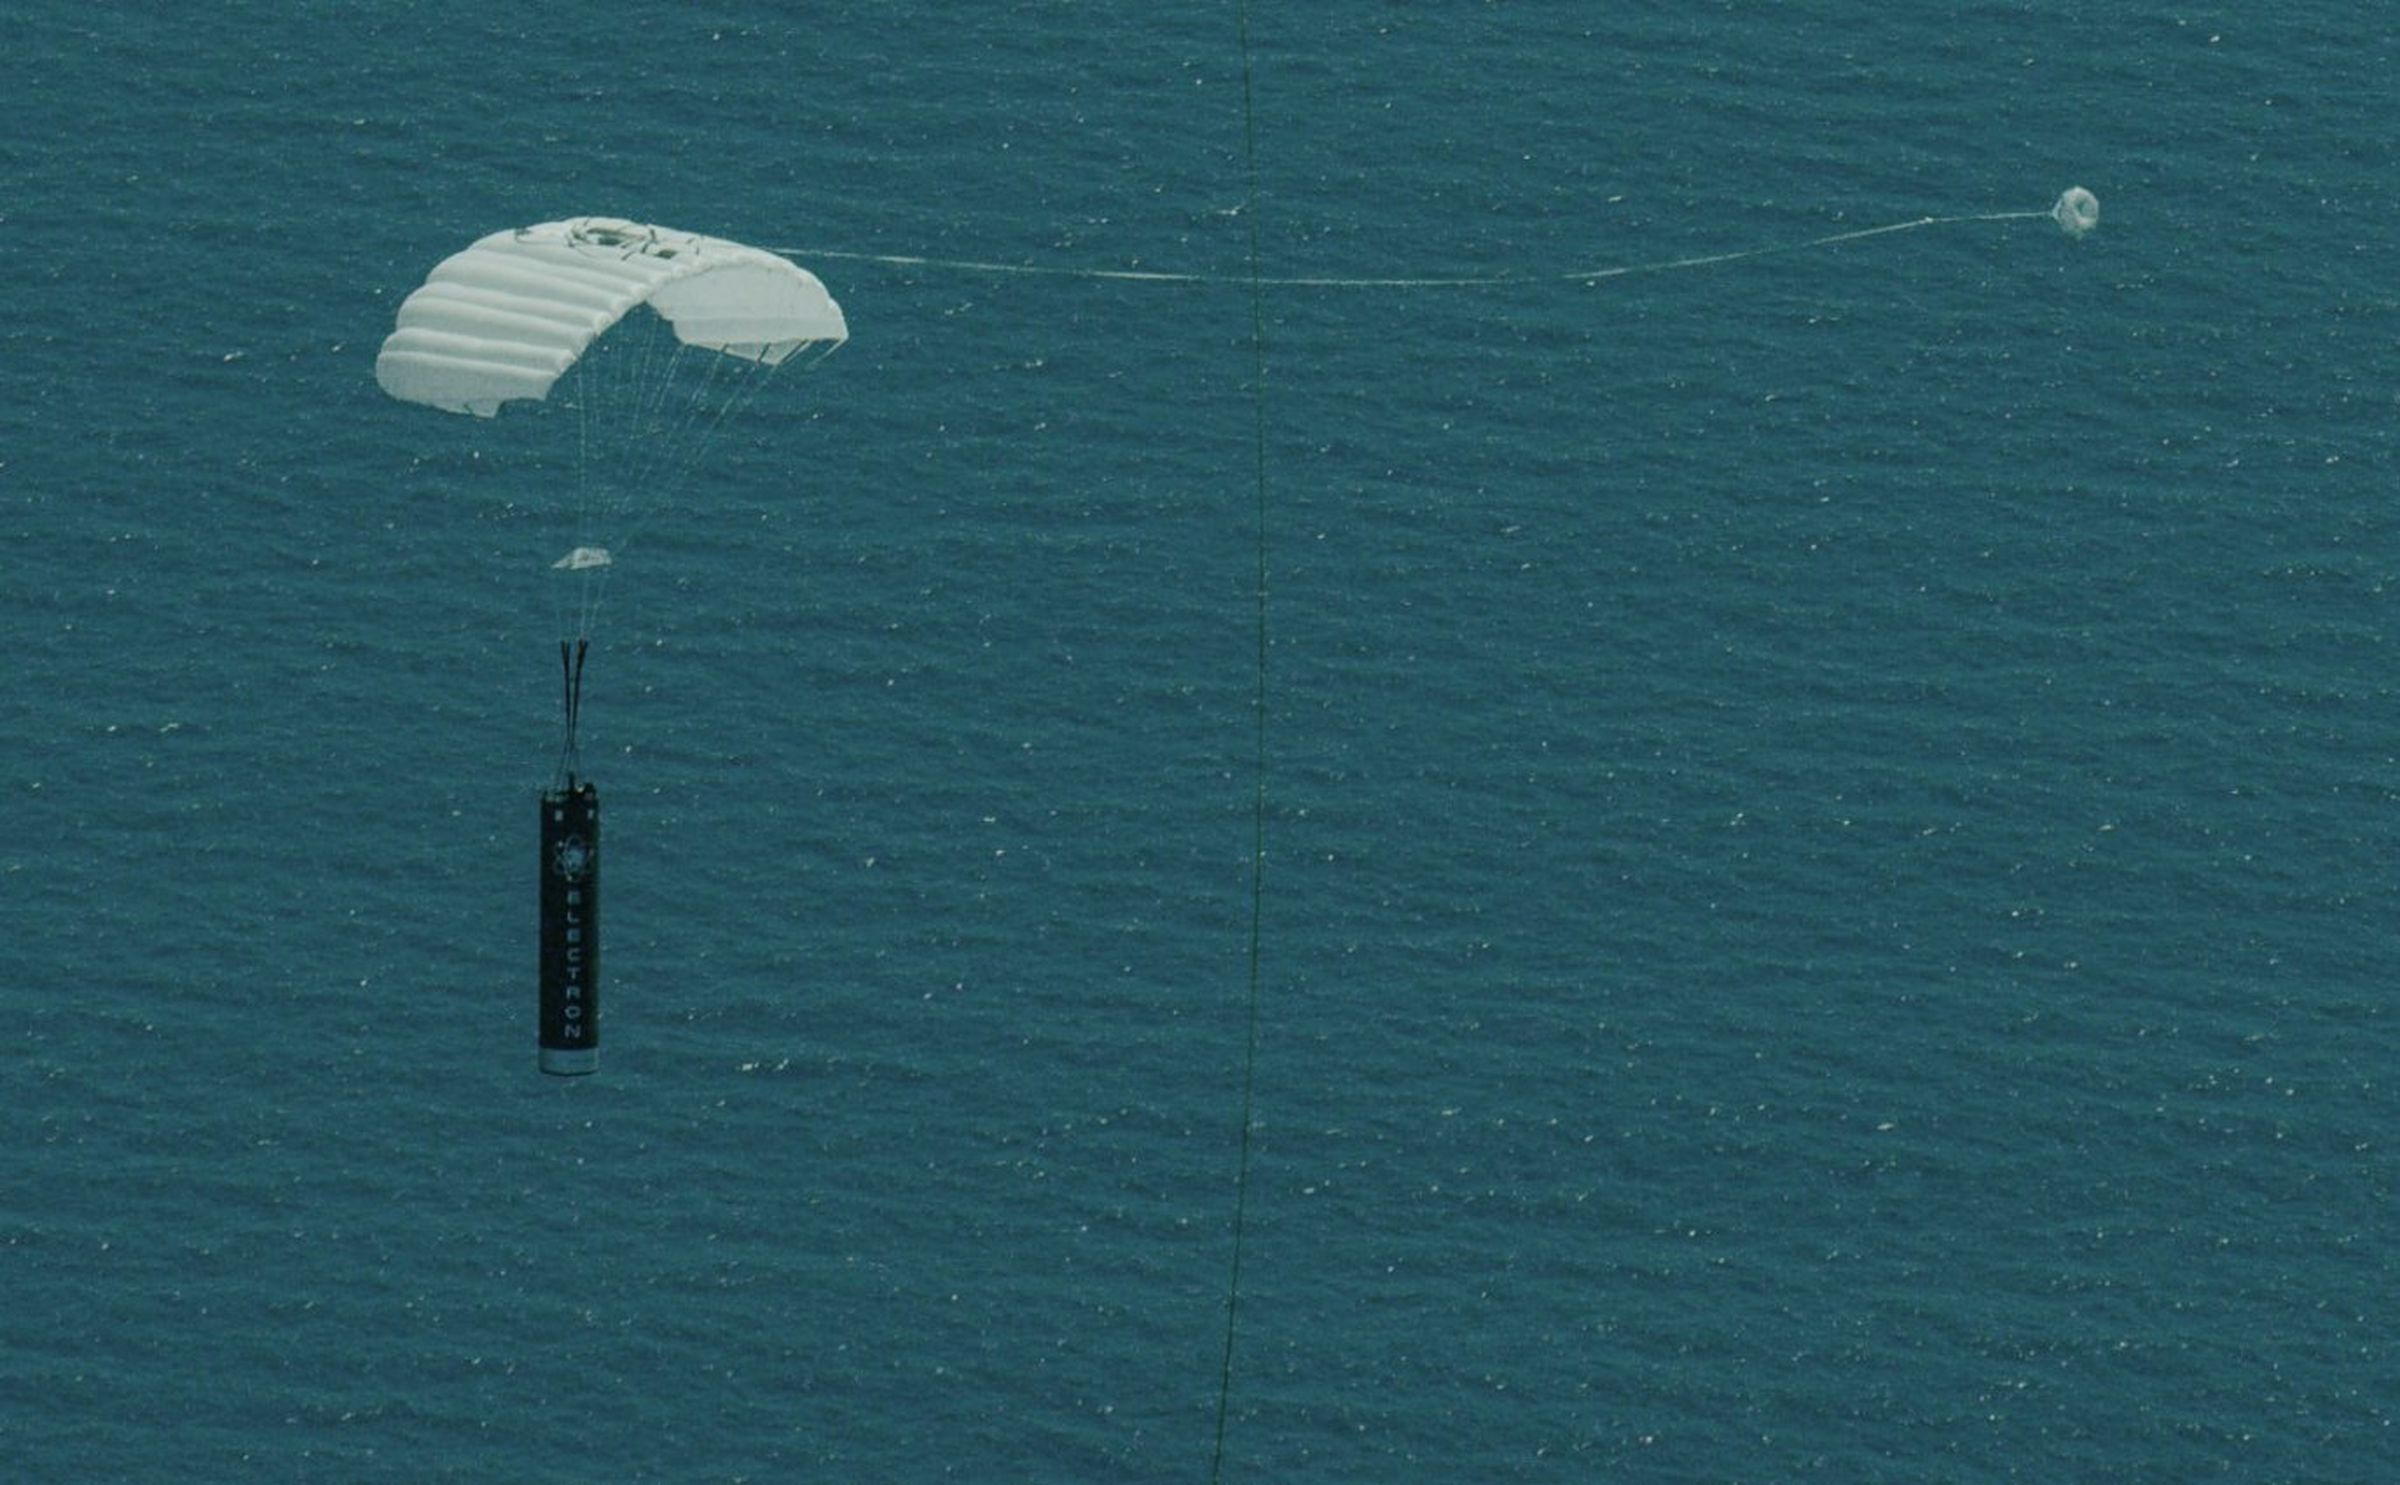 Rocket Lab’s Electron first stage floats under a parachute for a return splashdown test after launching satellites to space.